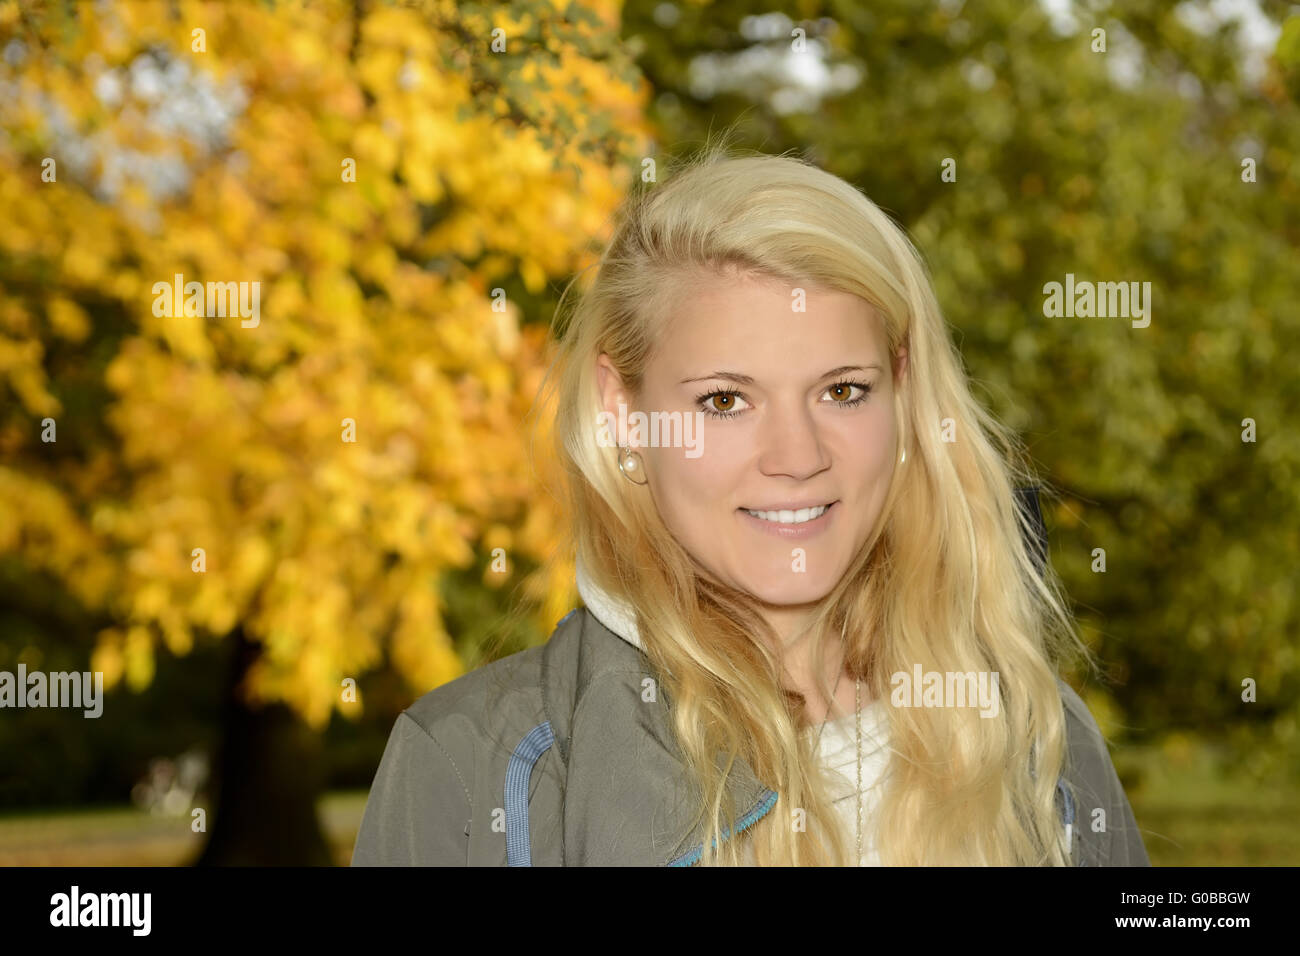 pretty young woman Stock Photo